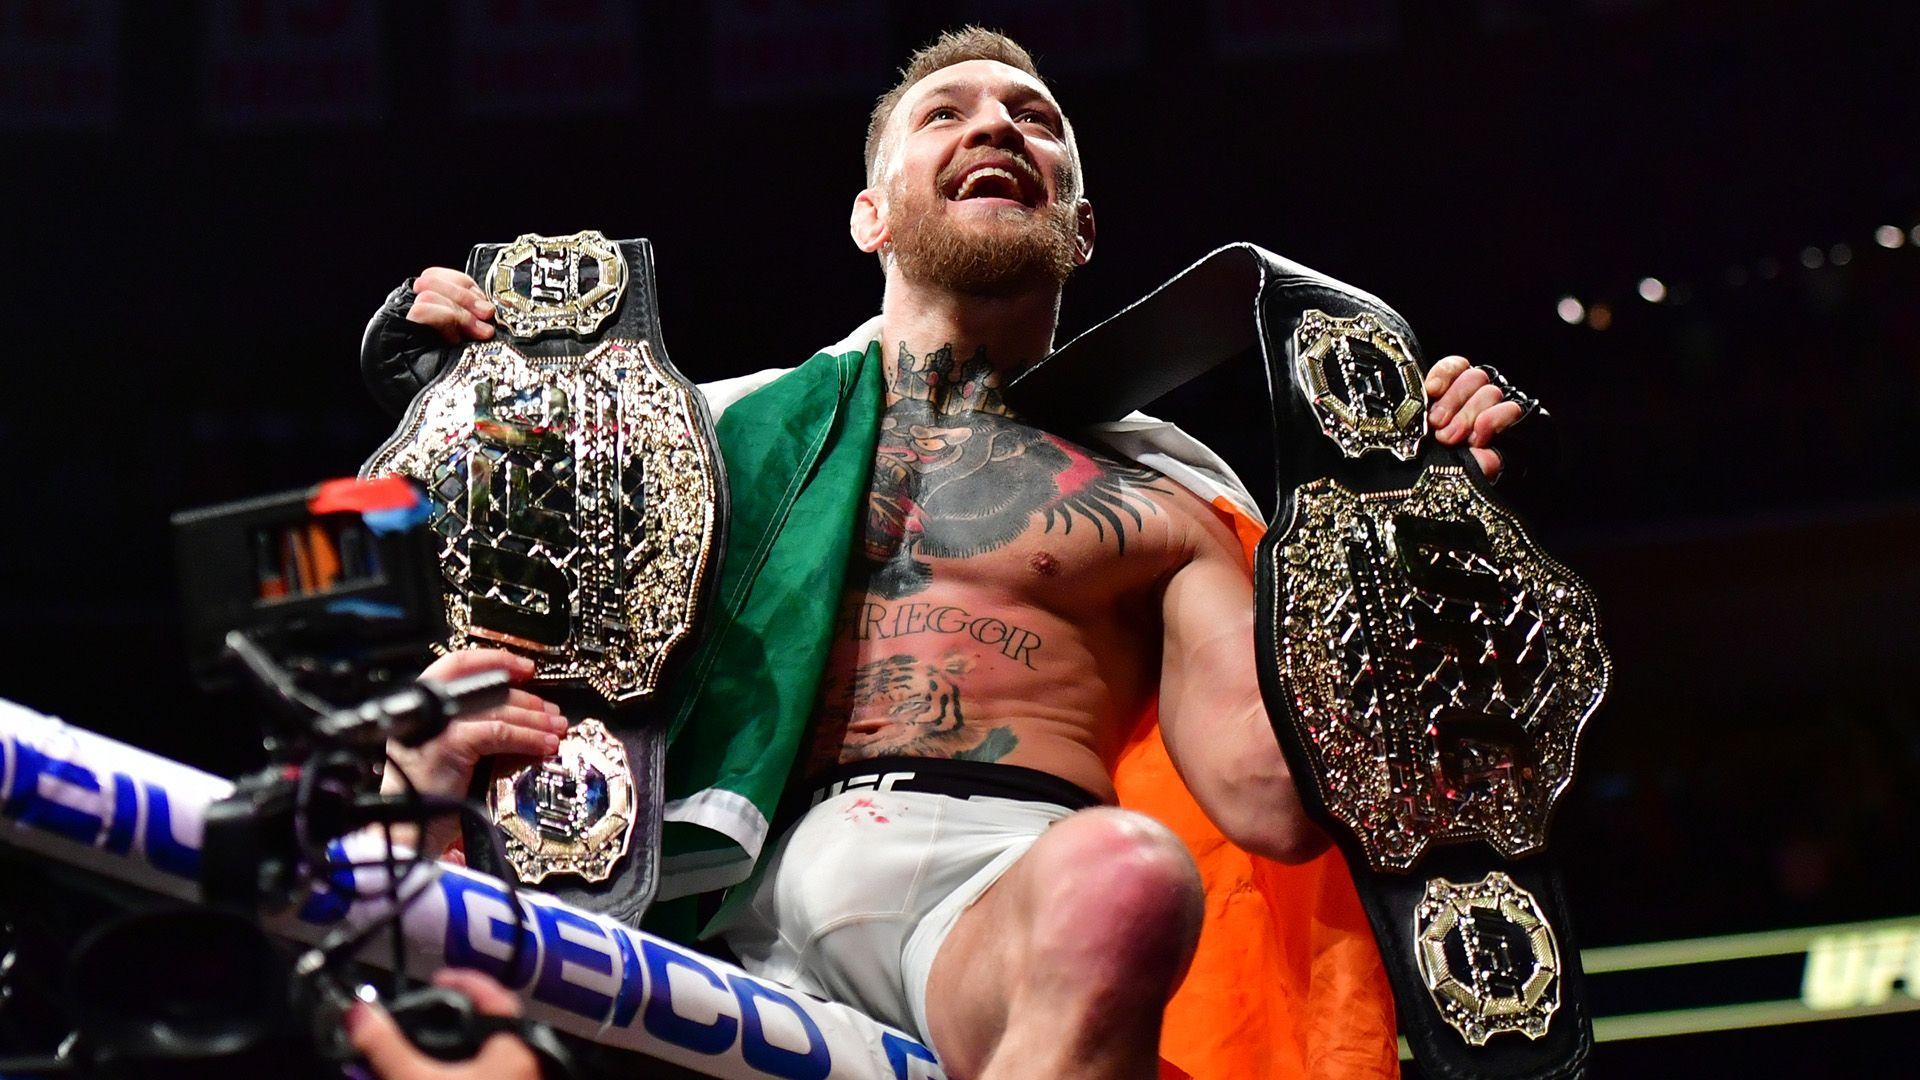 Conor McGregor Best Wallpaper And Photo In Full HD